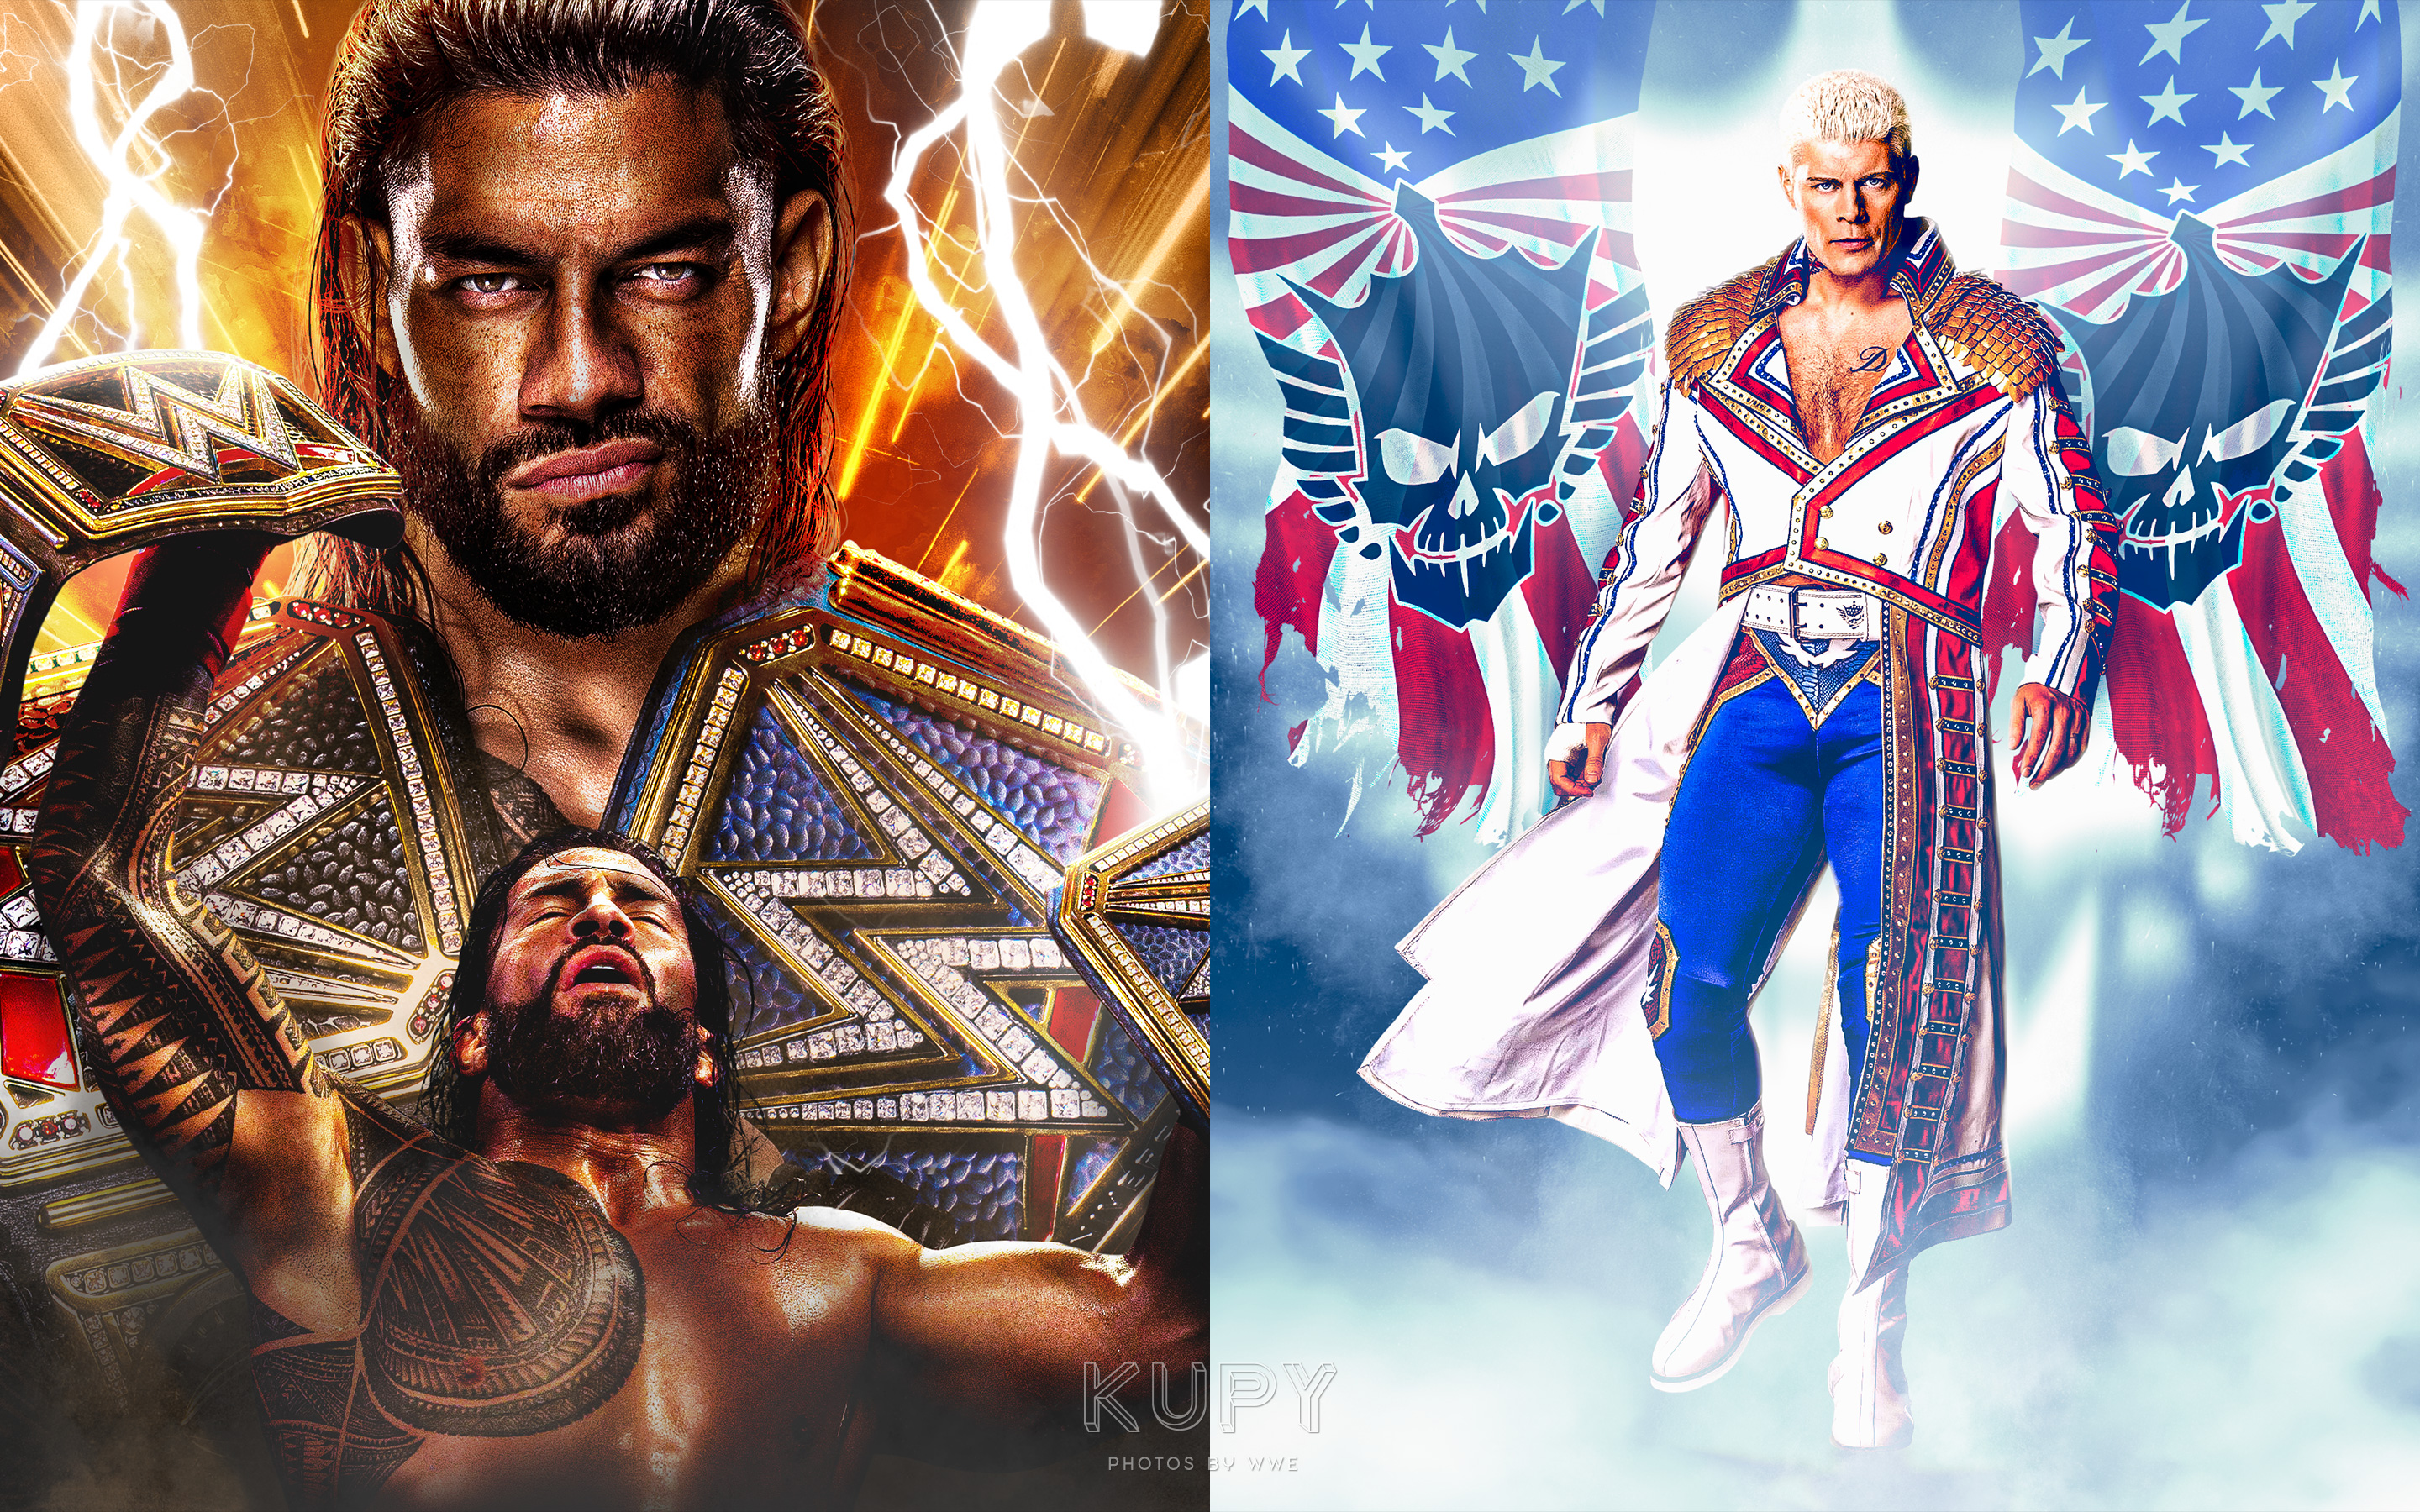 NEW 2 in 1 WWE wallpaper: Undisputed WWE Universal Champion Roman Reigns pl...